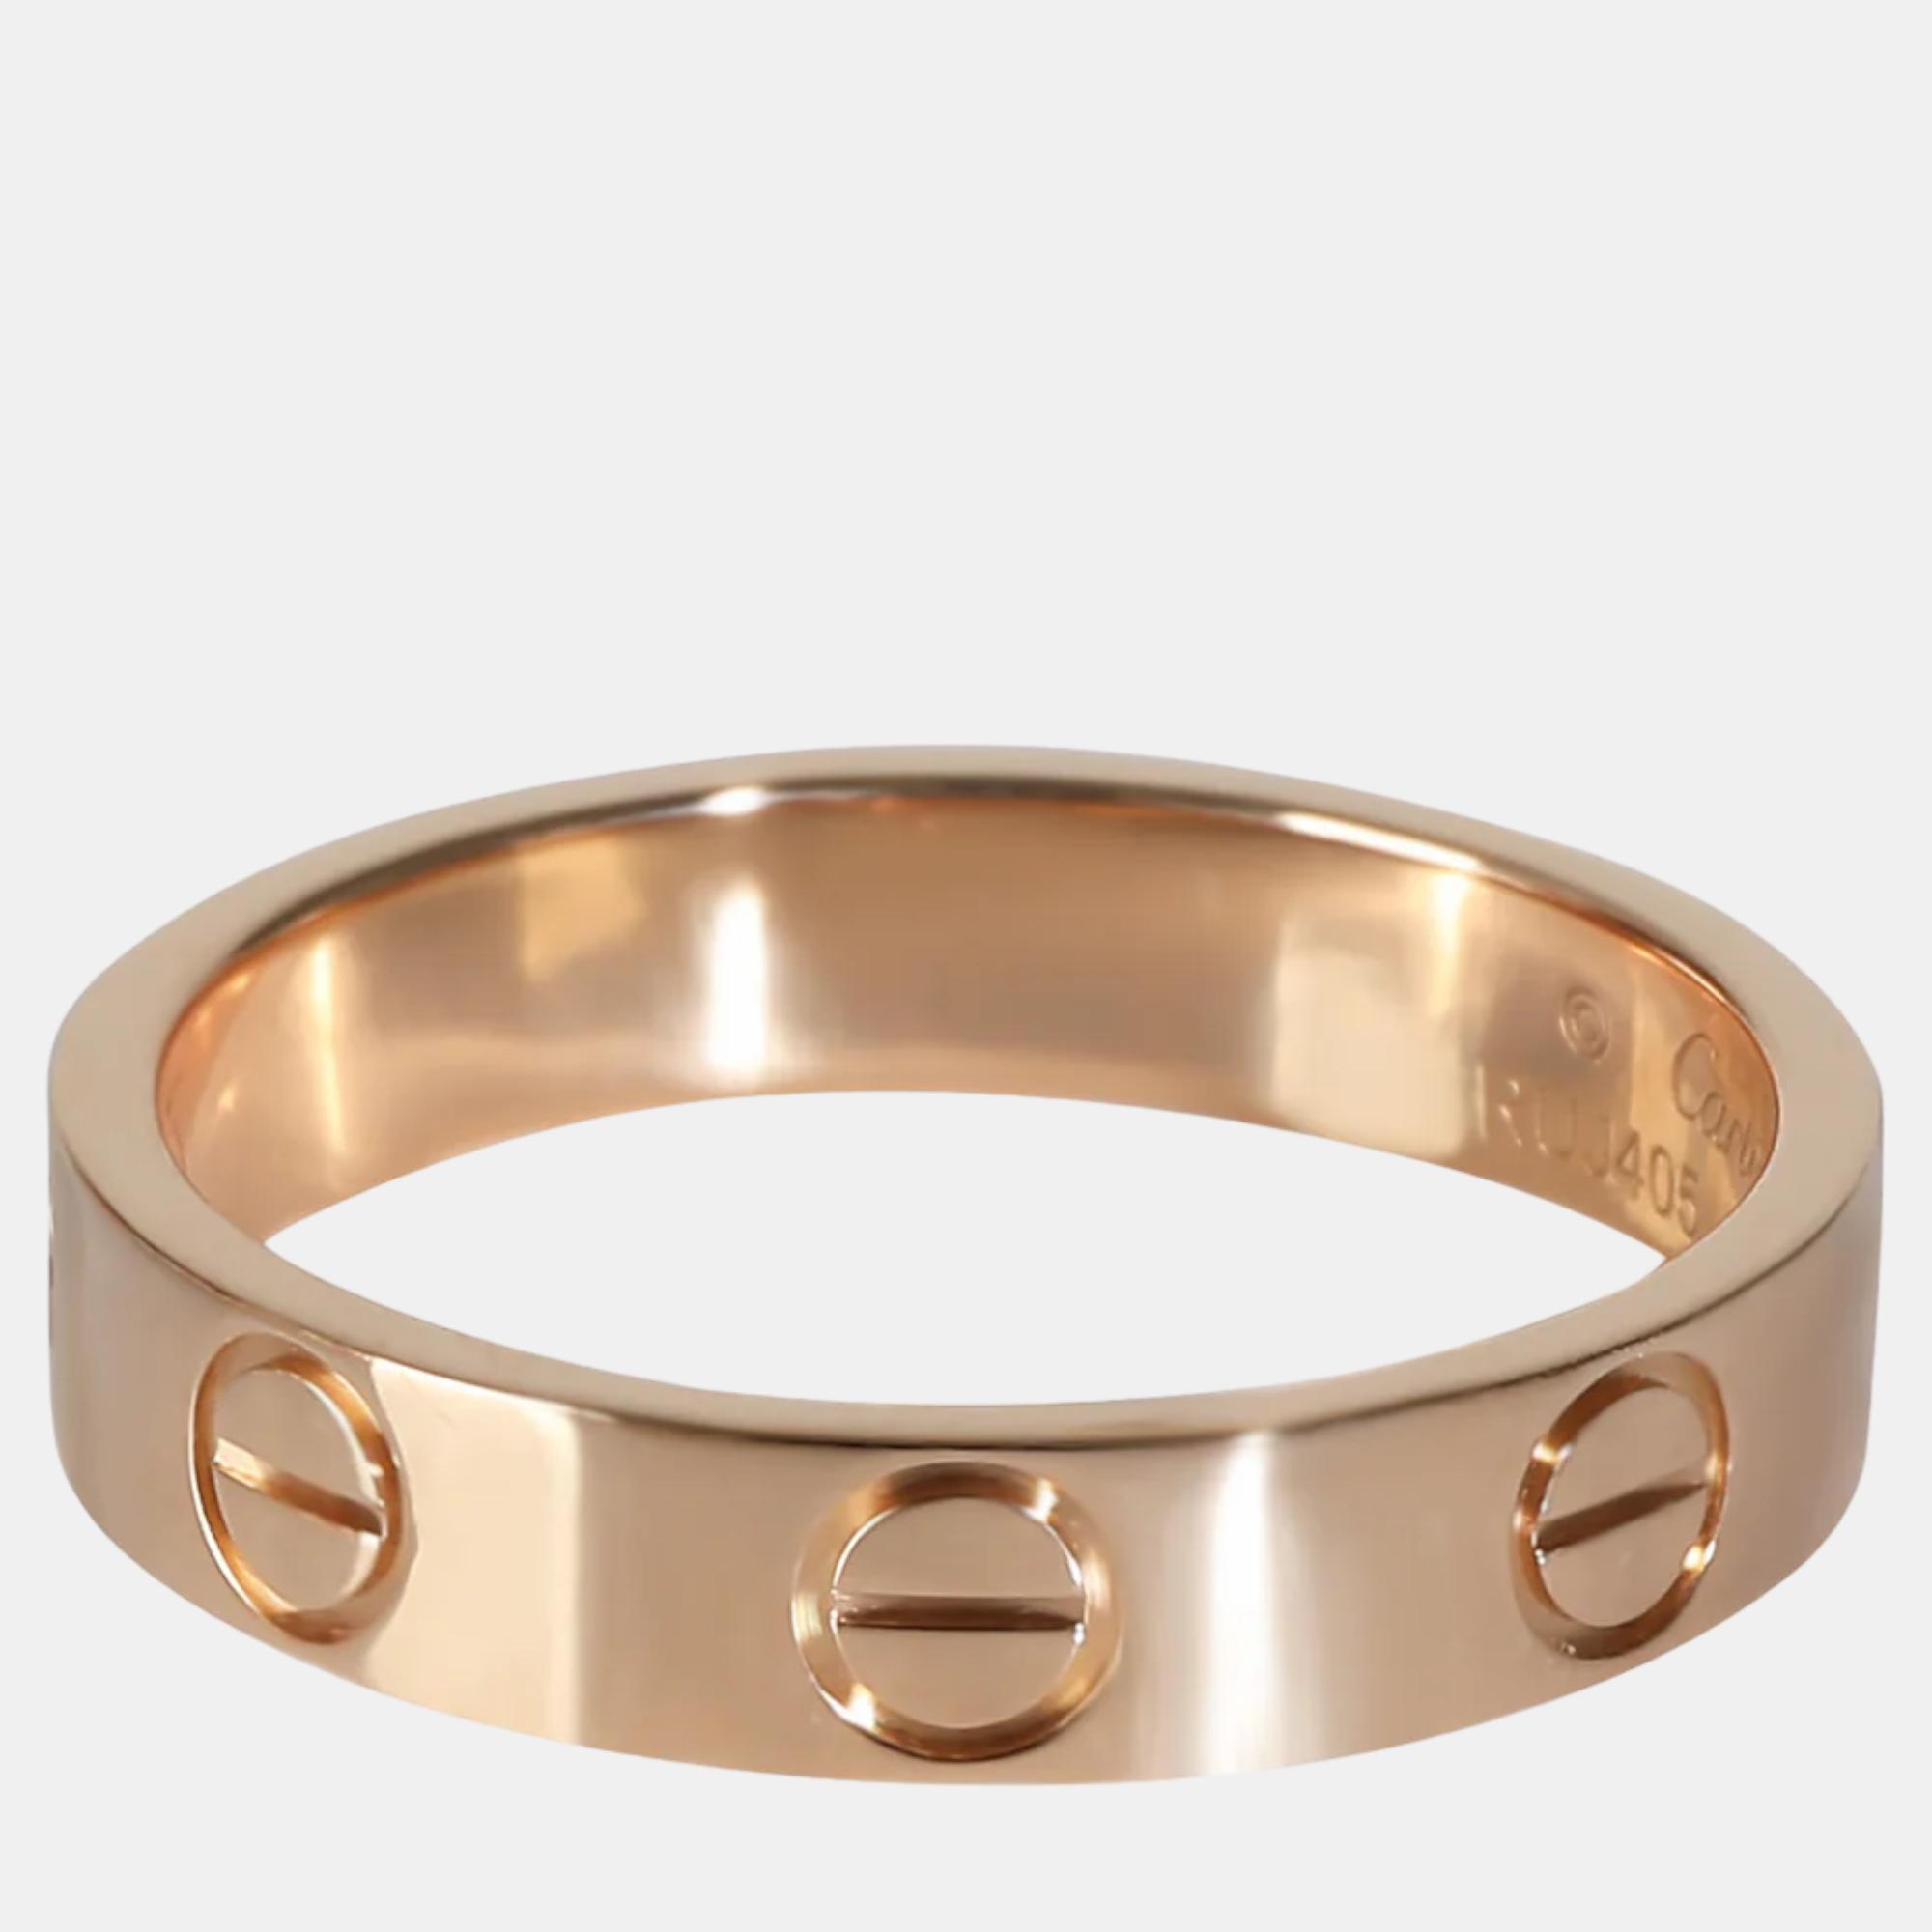 Cartier rose gold love wedding band ring